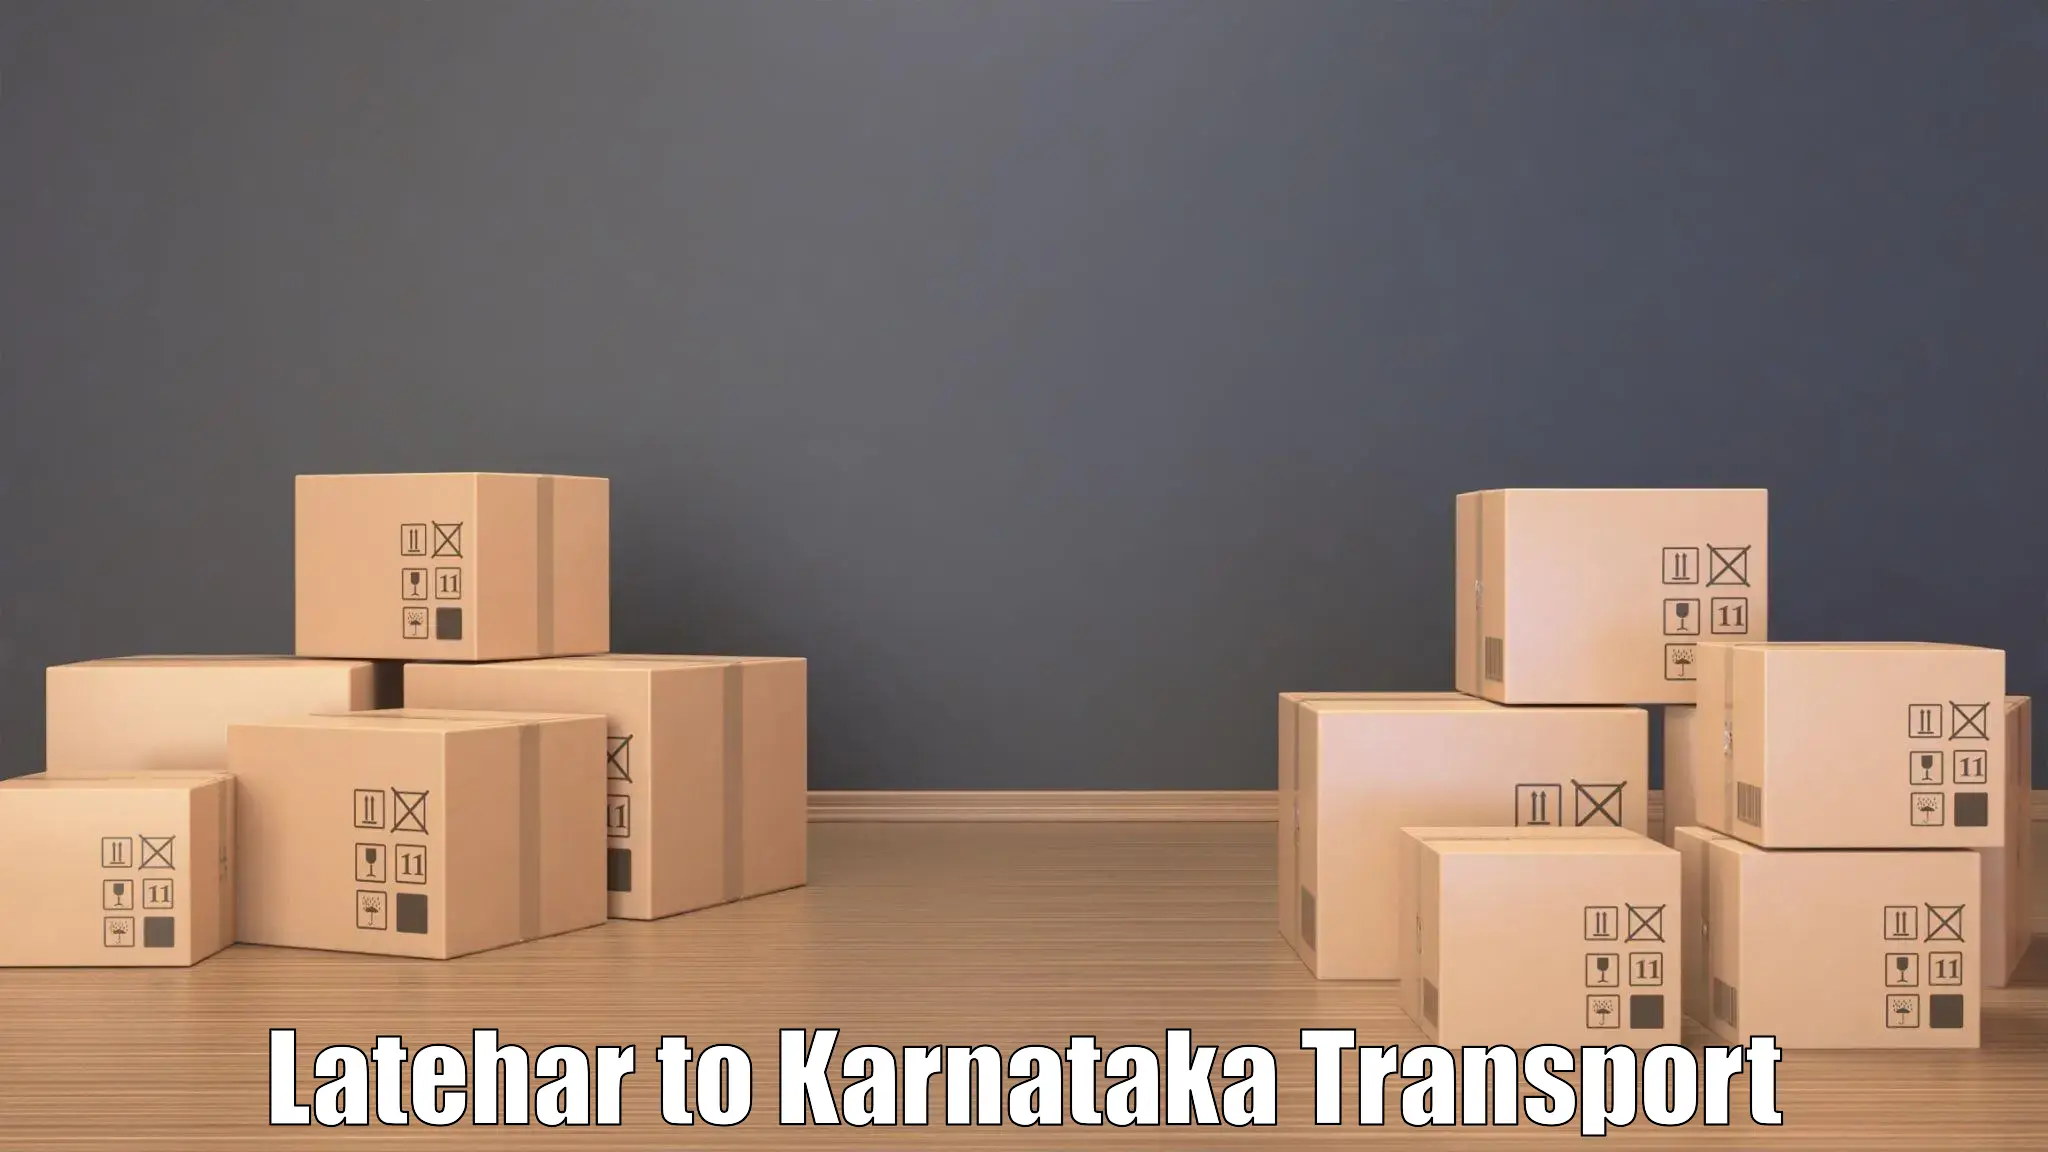 Best transport services in India Latehar to Mandya